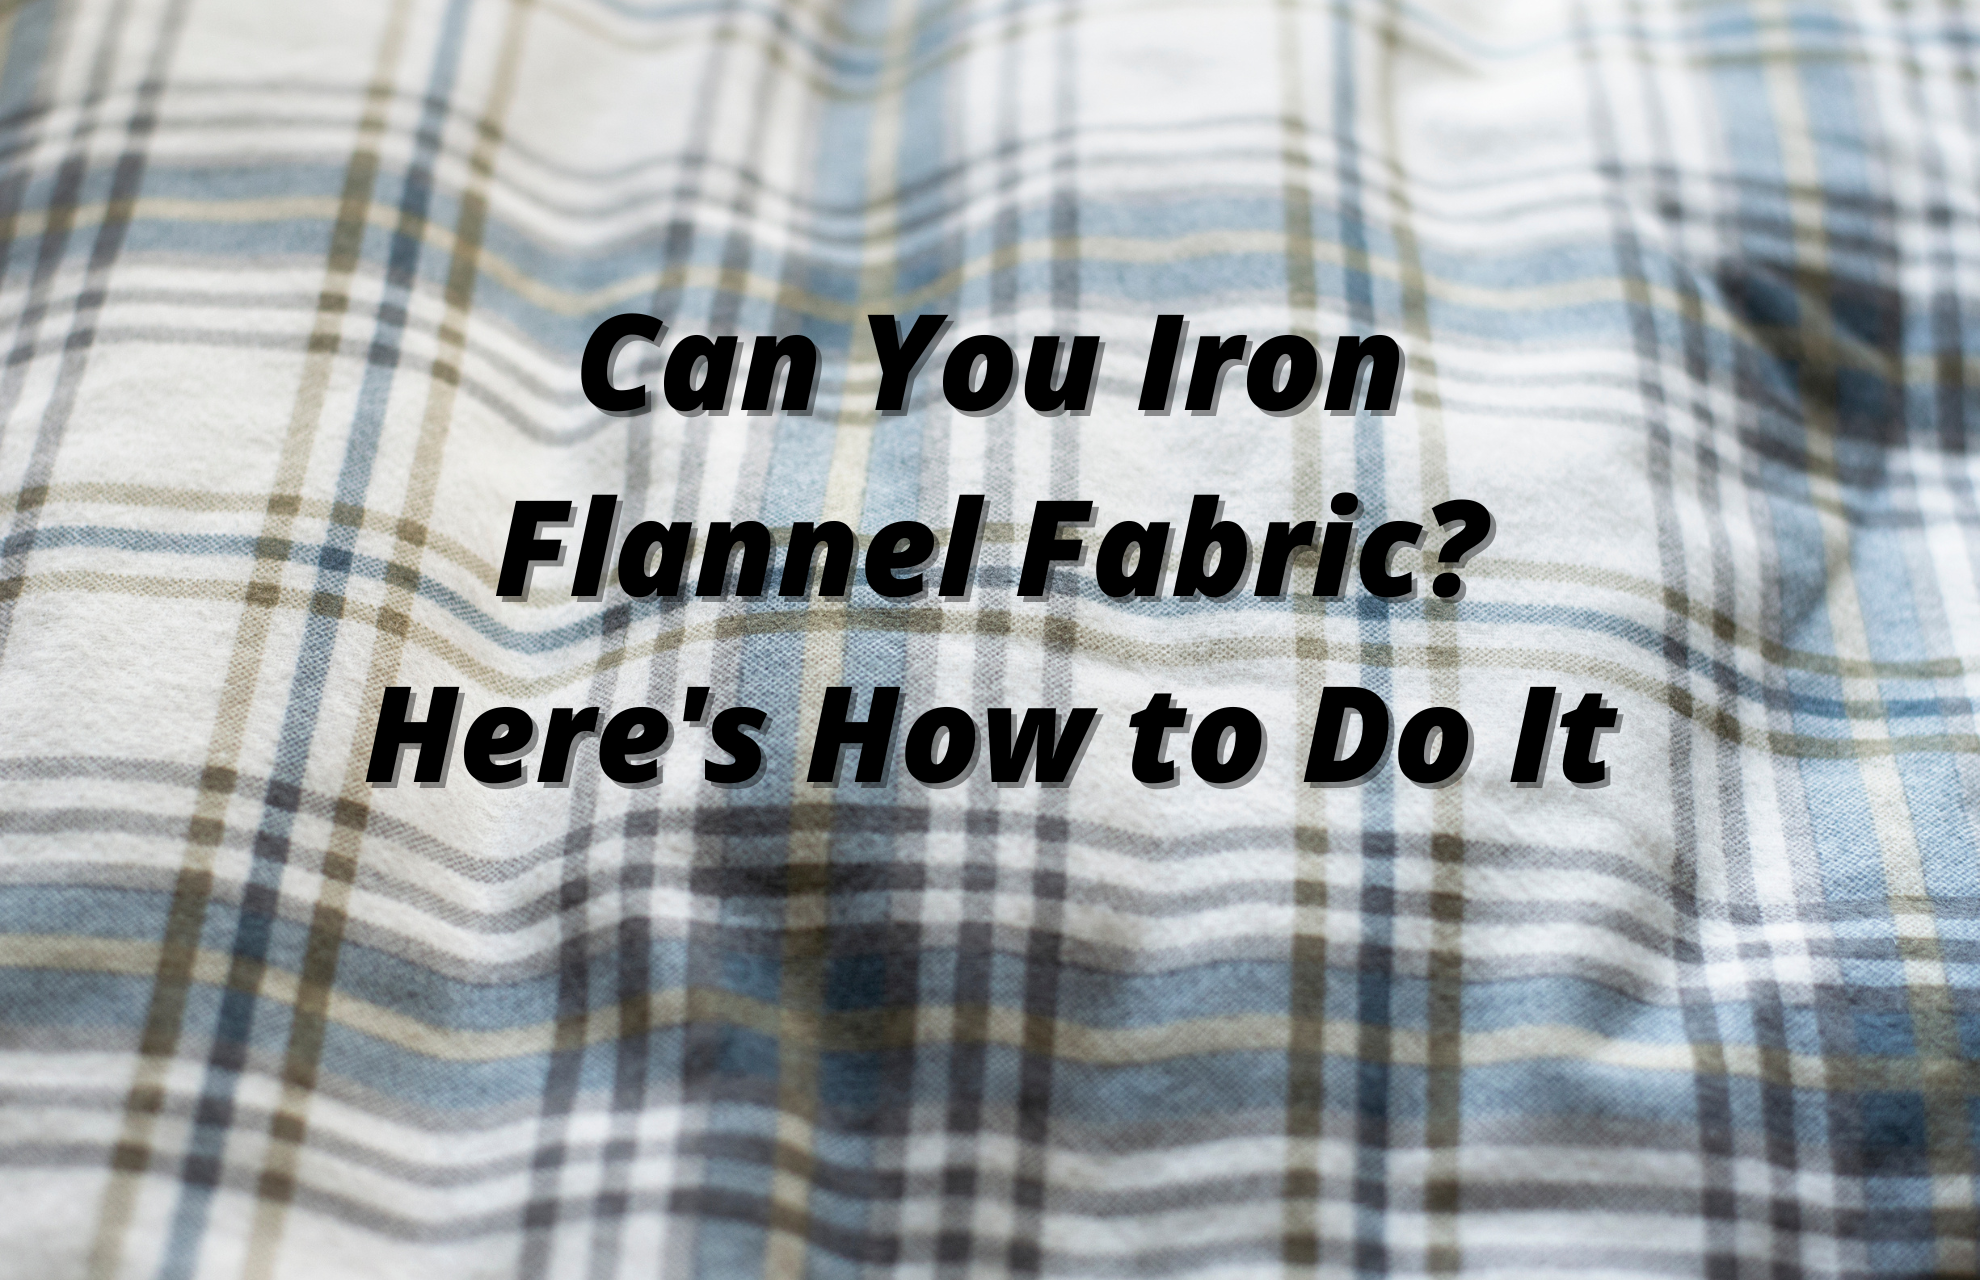 Can You Iron Flannel Fabric? Here's How to Do It